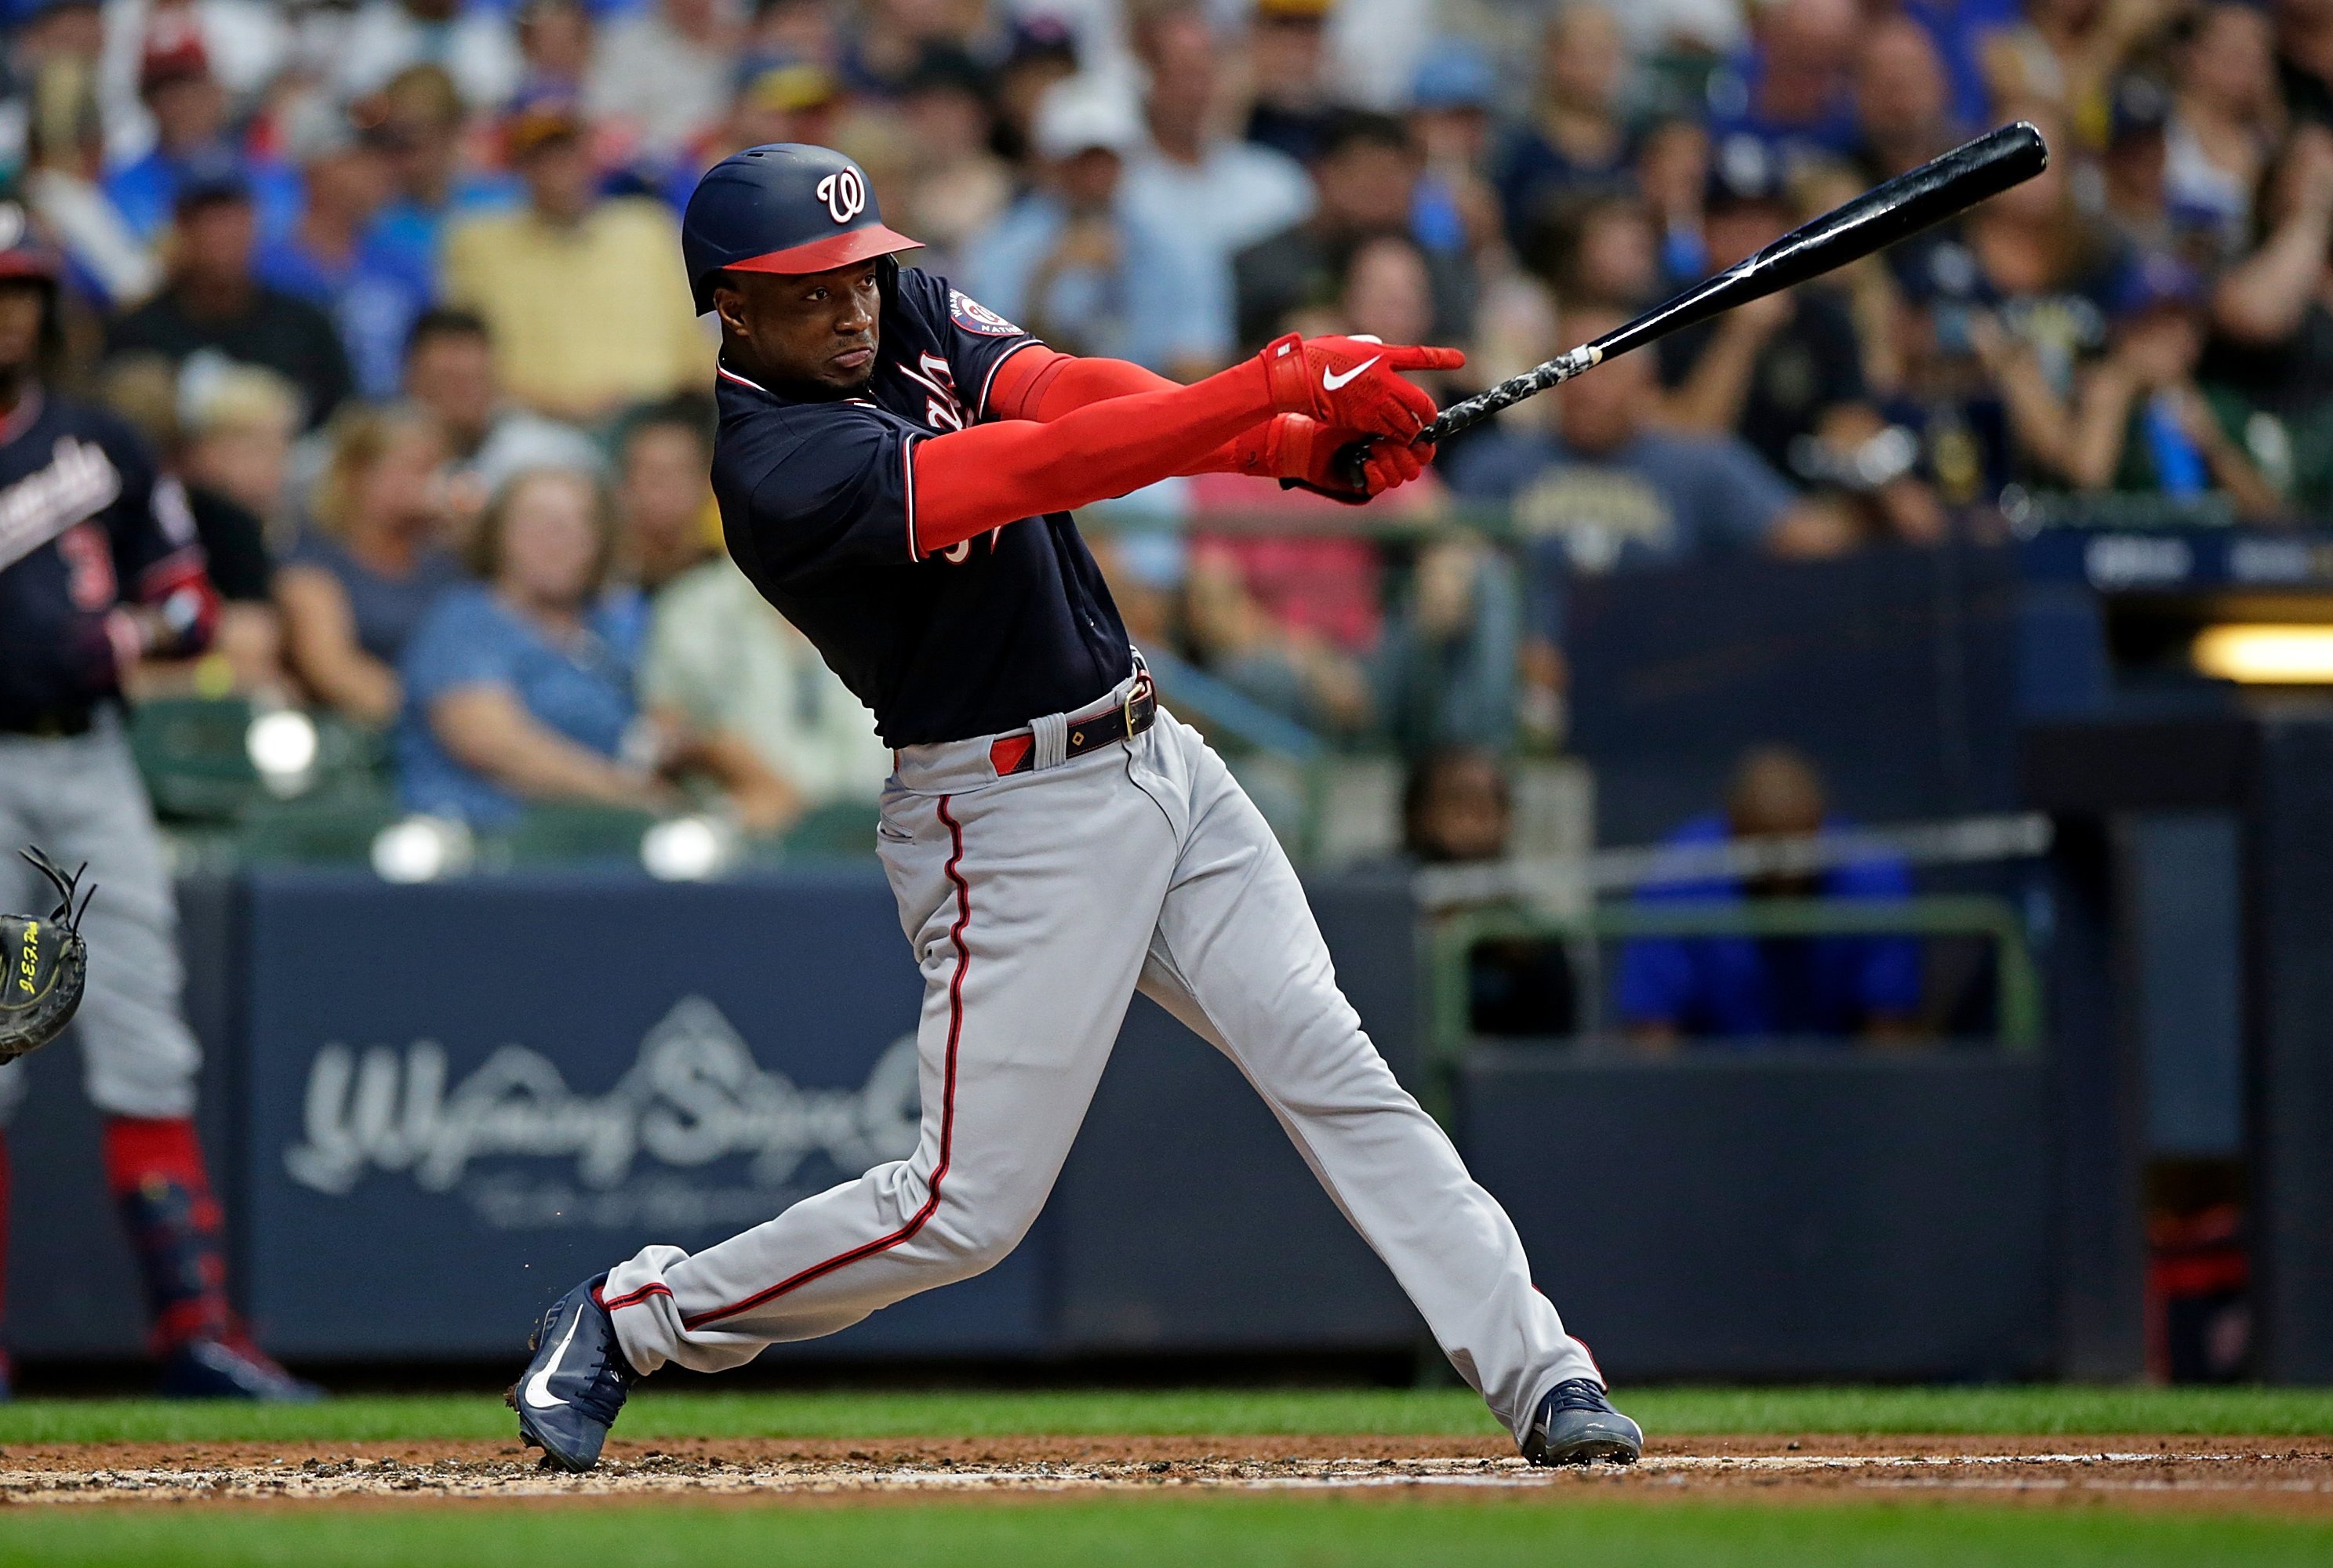 Braves Offseason Priorities for 2021 - Outfield Fly Rule